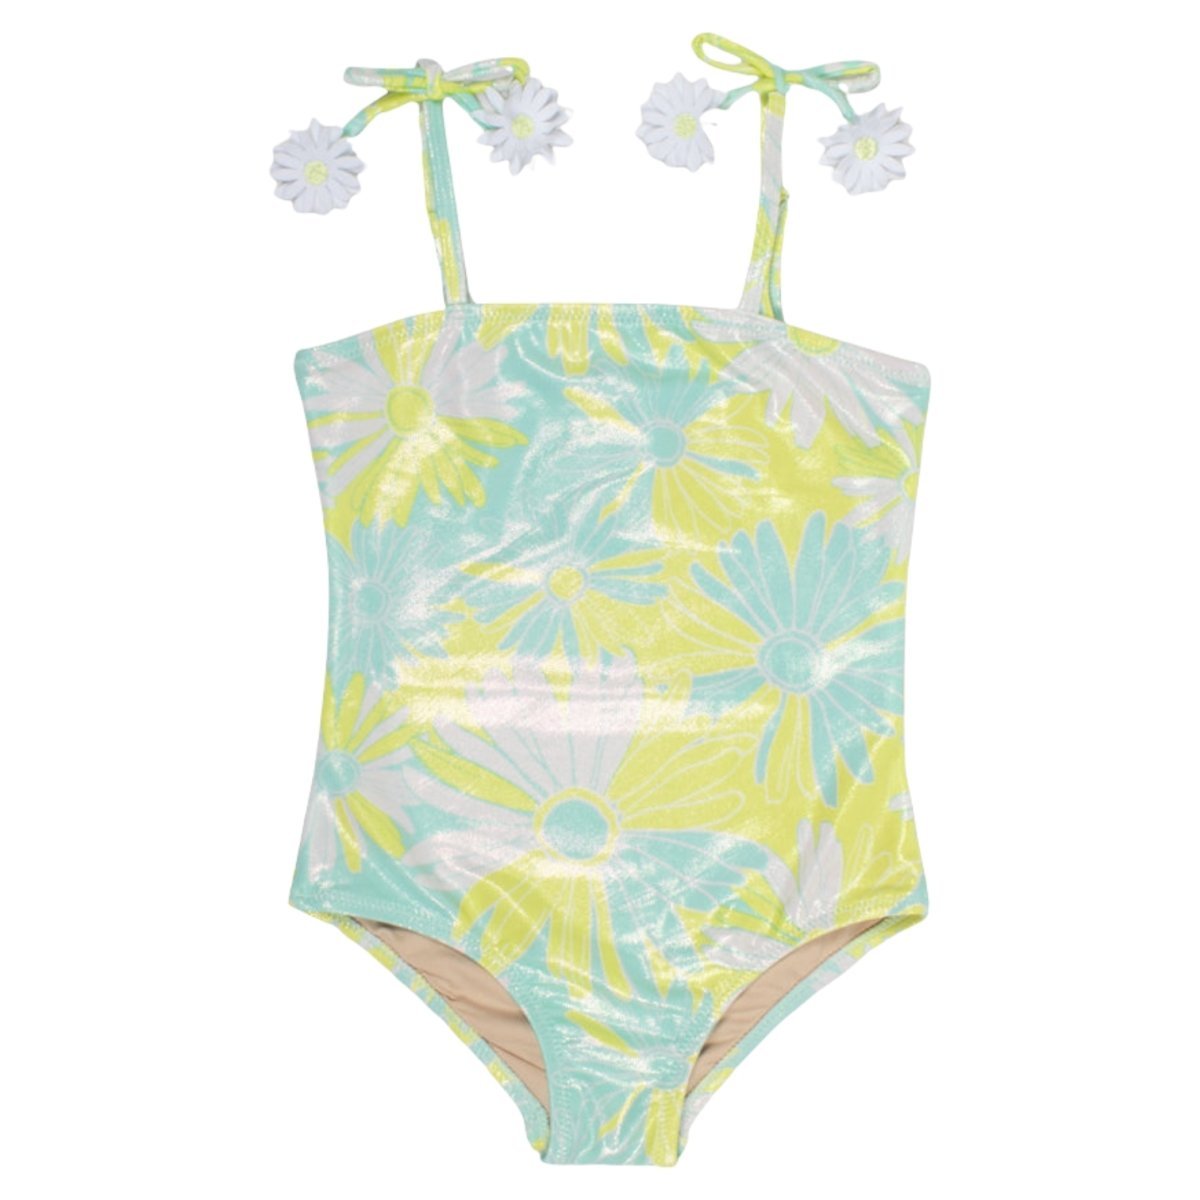 SHIMMER DAISY ONE PIECE - ONE PIECE SWIMSUIT